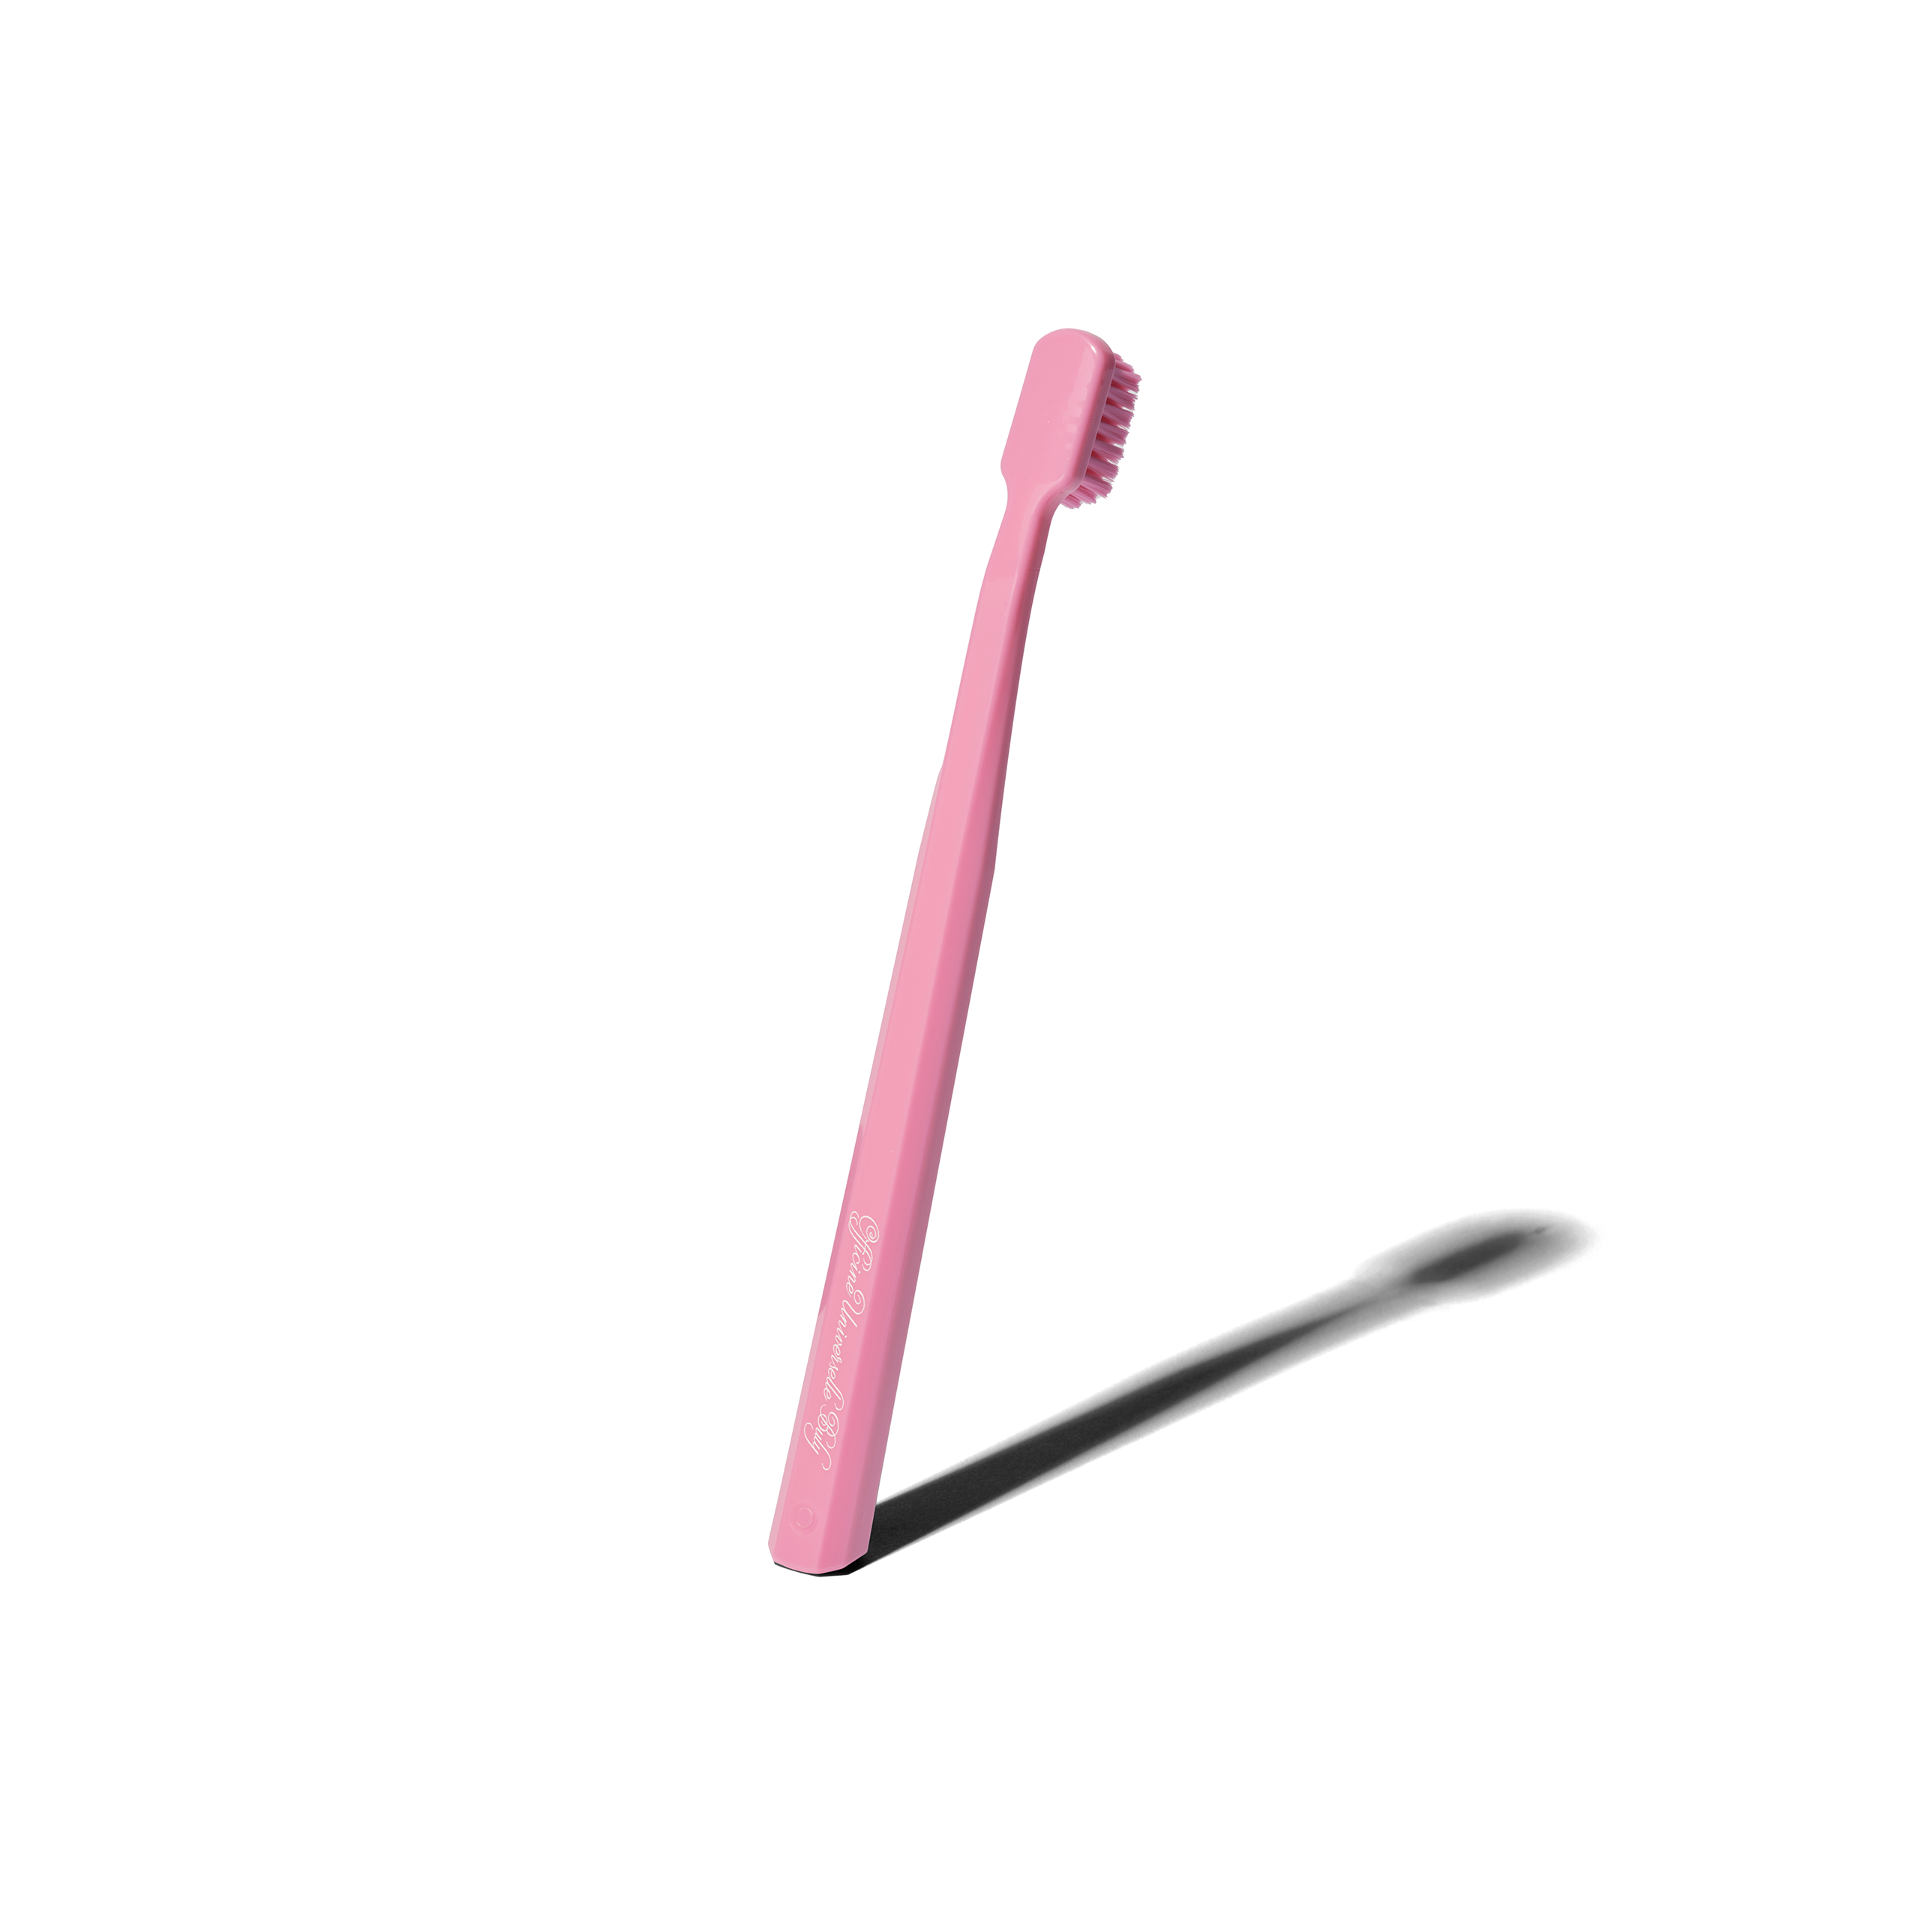 Pink Curaprox toothbrush